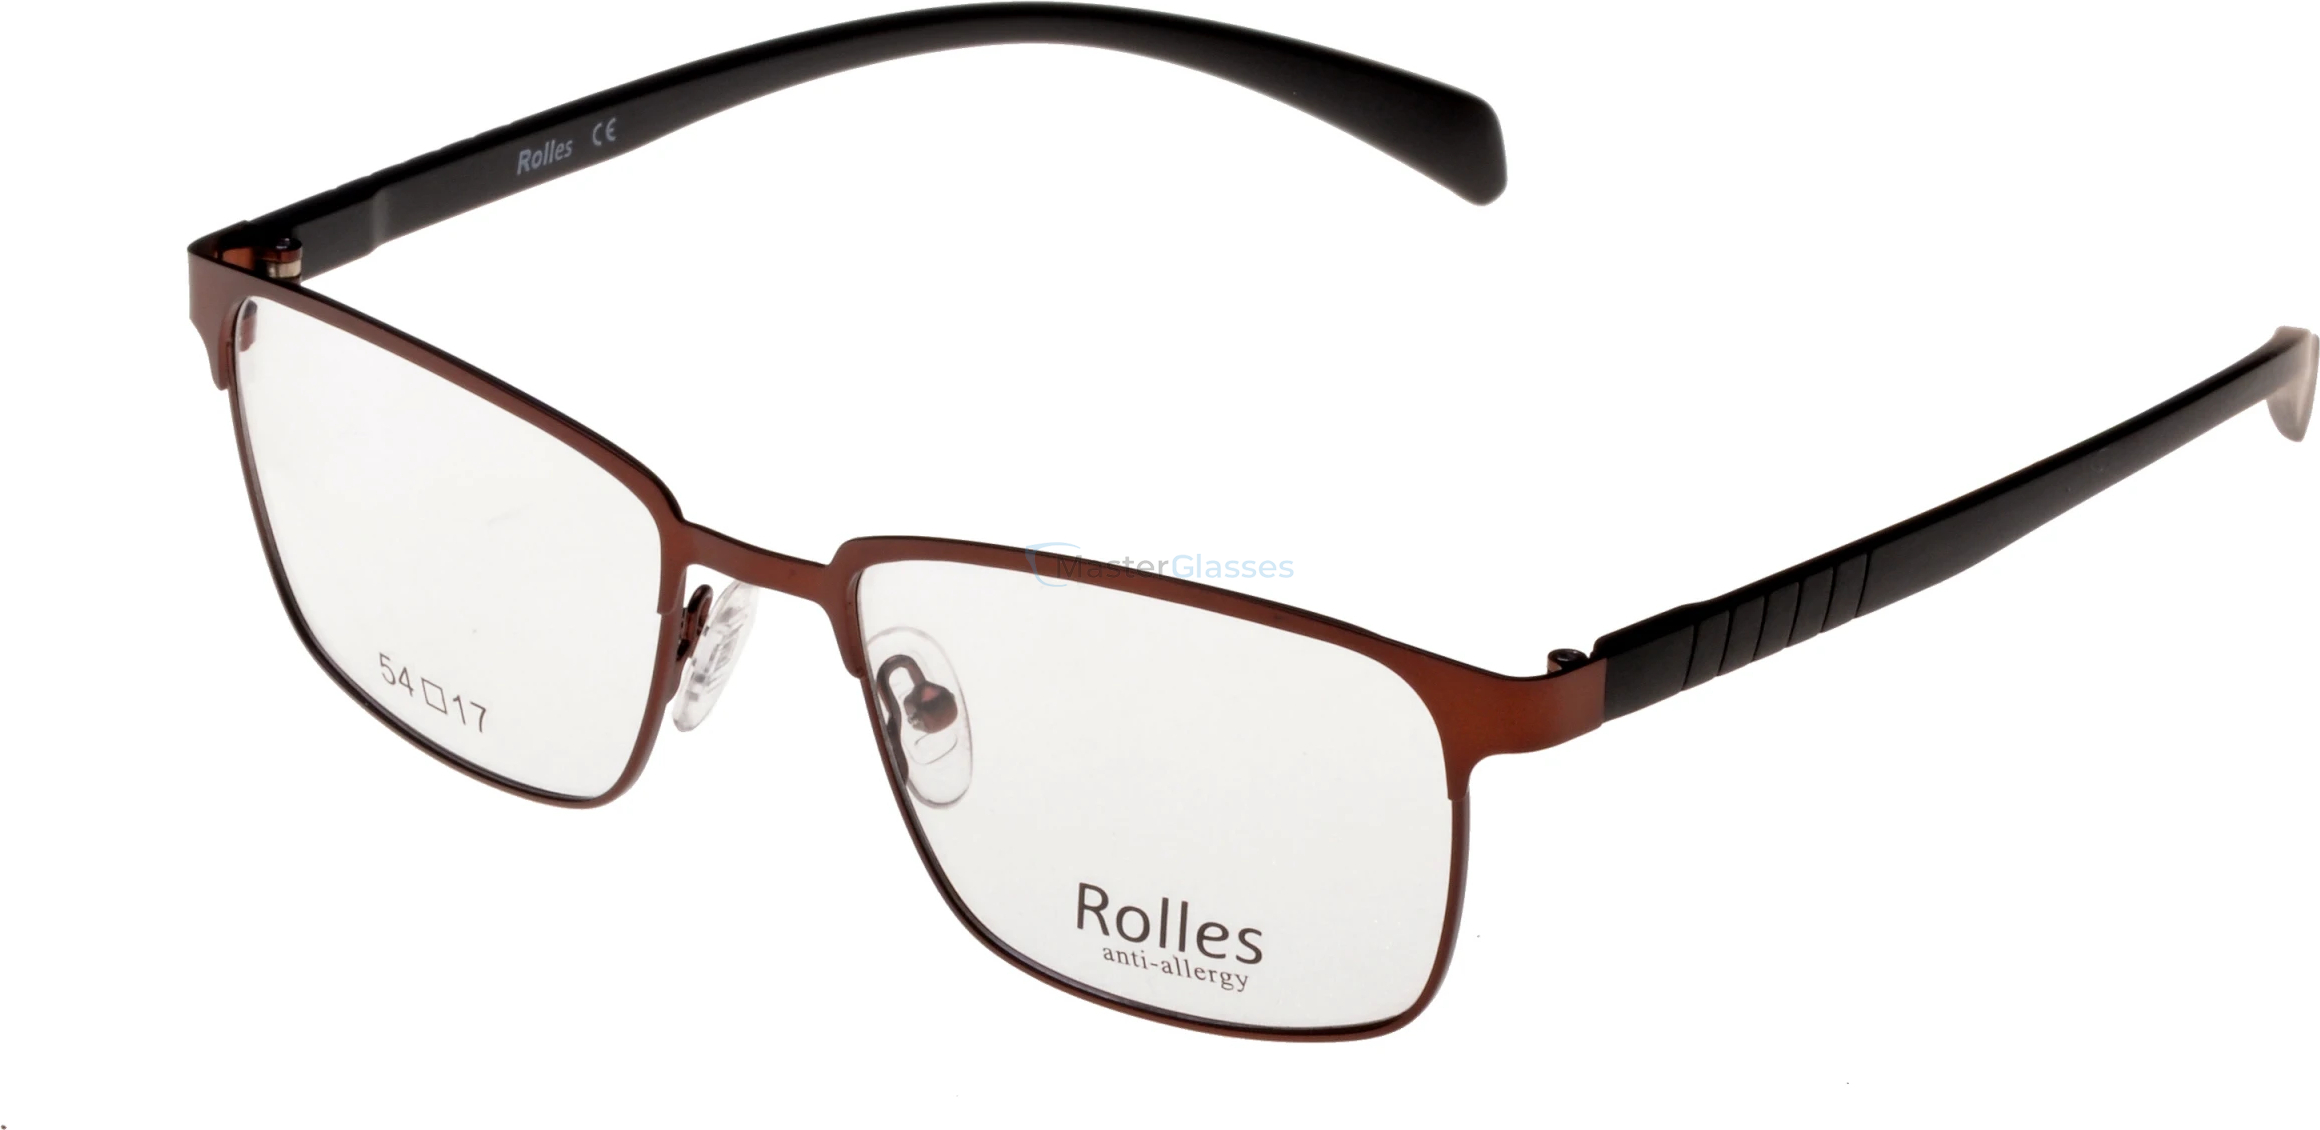  Rolles 509 02